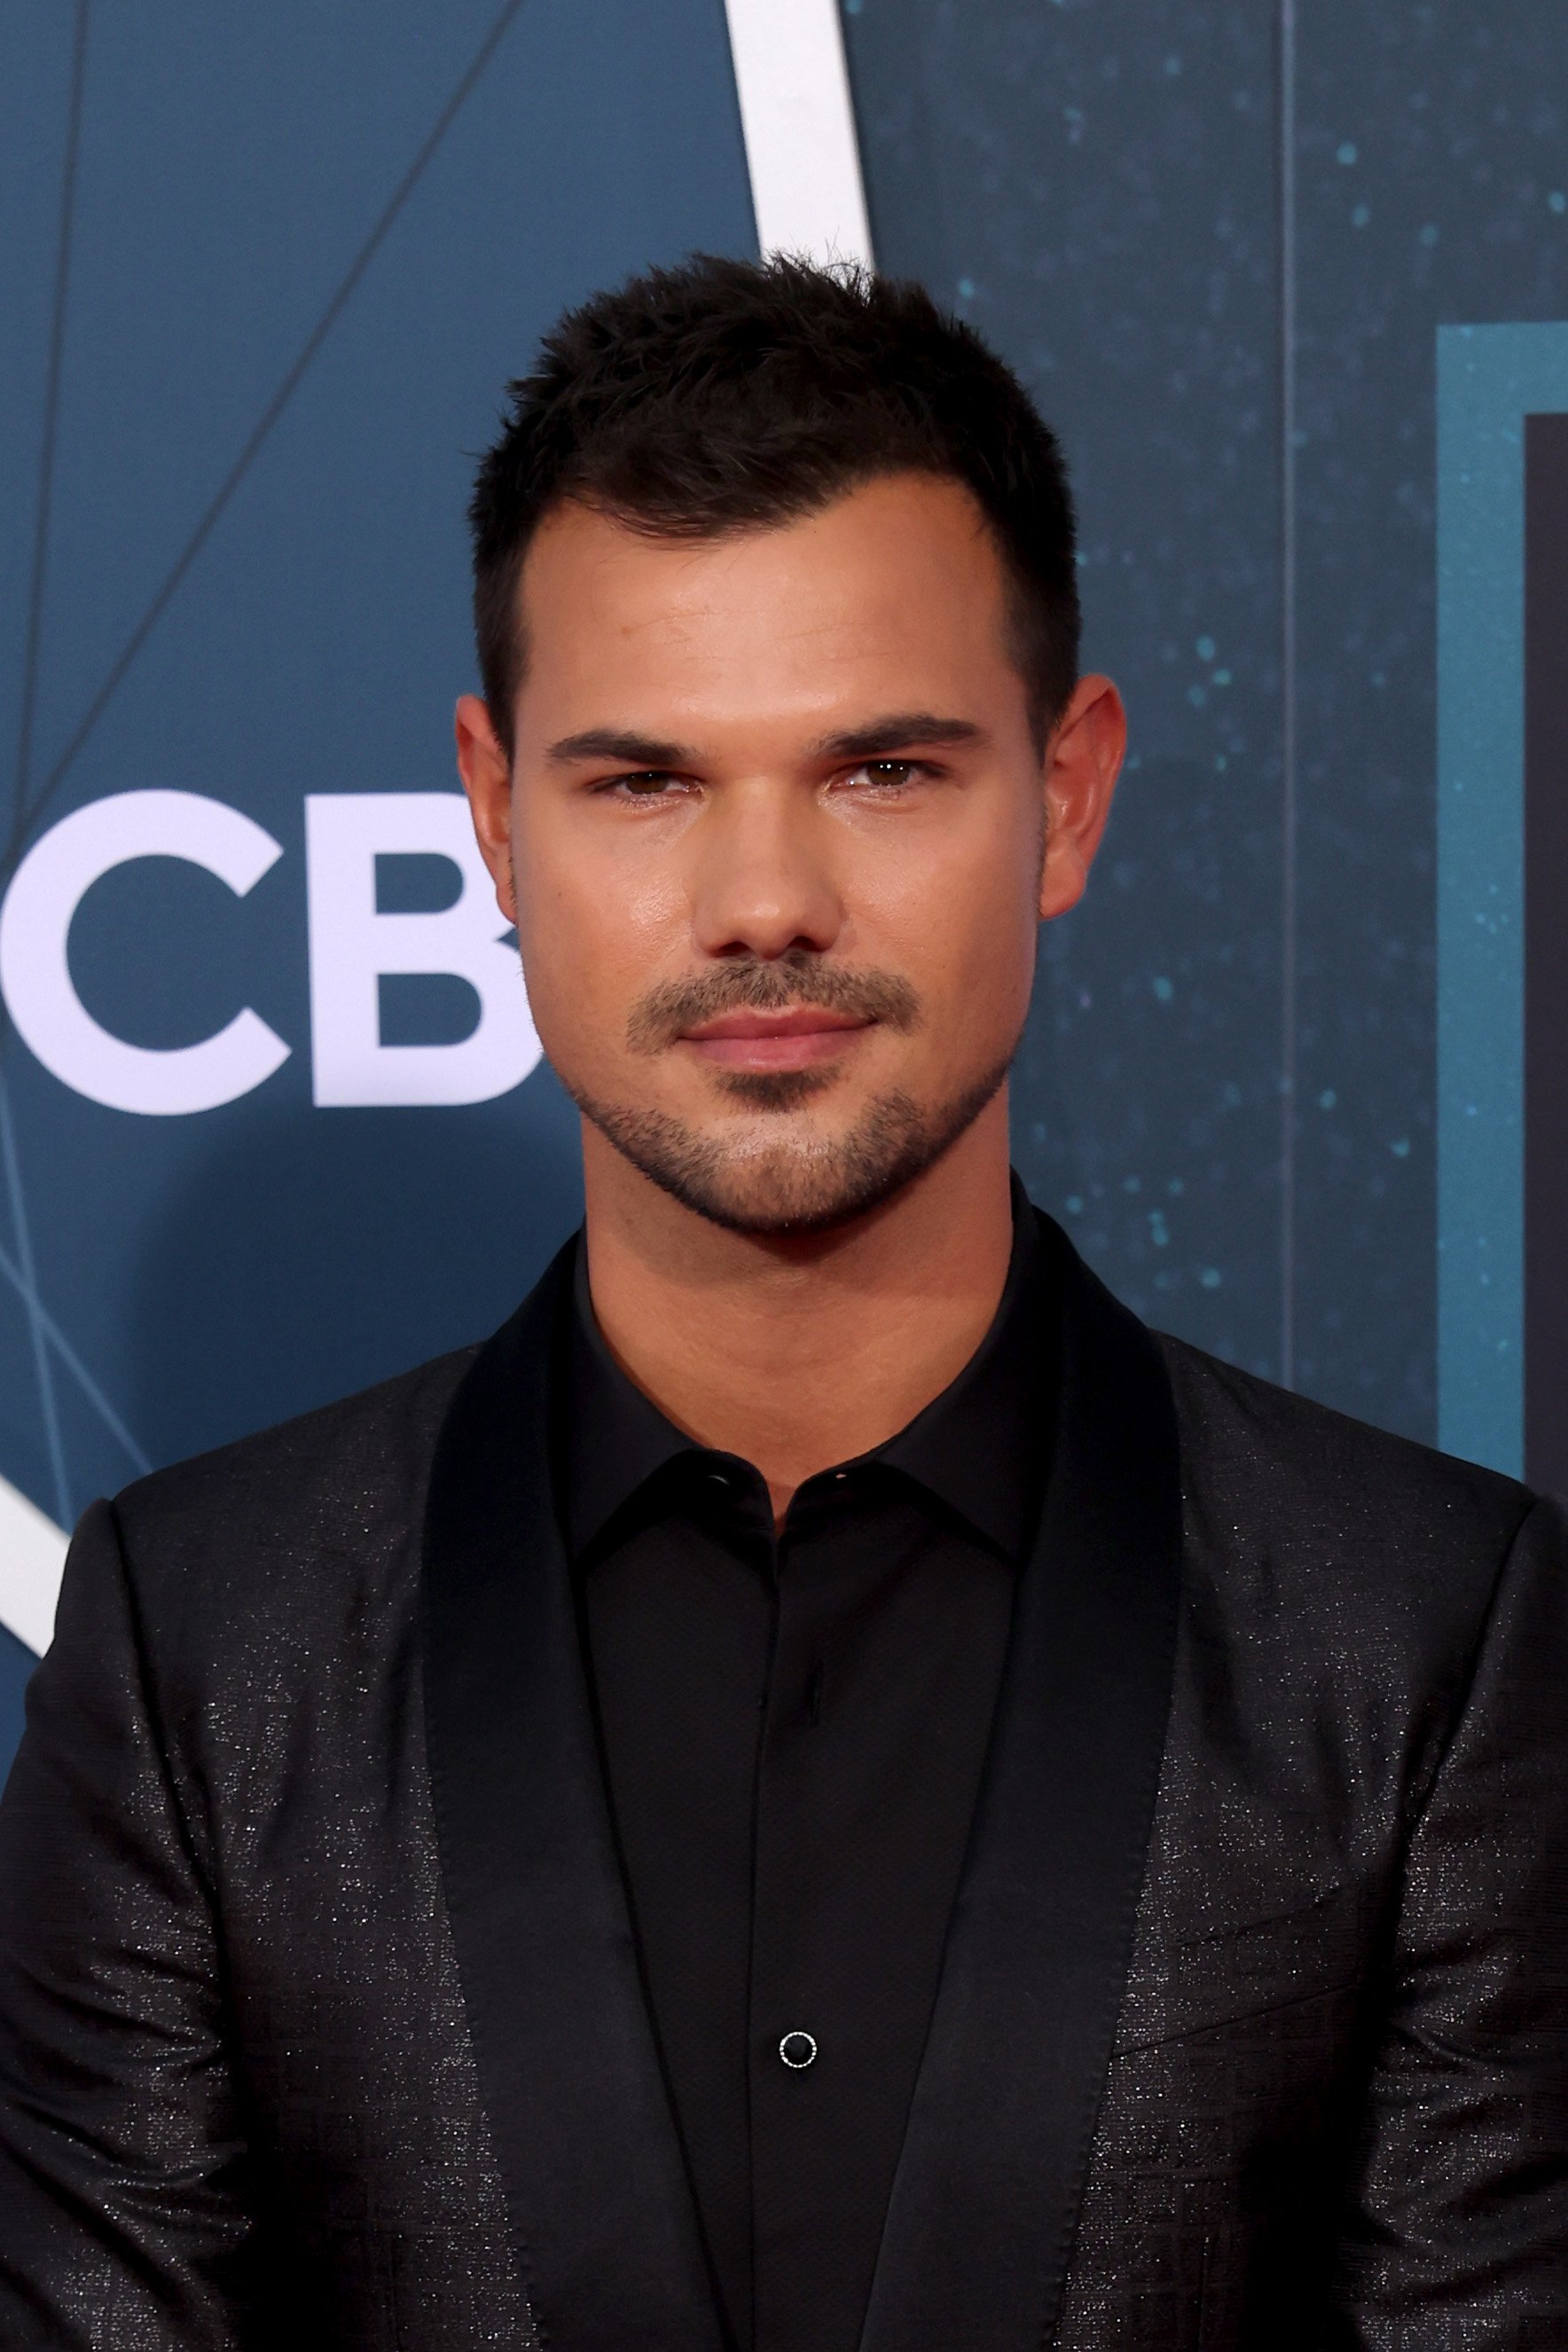 Taylor Lautner poses at the 2022 CMT Music Awards at Nashville Municipal Auditorium on April 11, 2022, in Nashville, Tennessee | Source: Getty Images